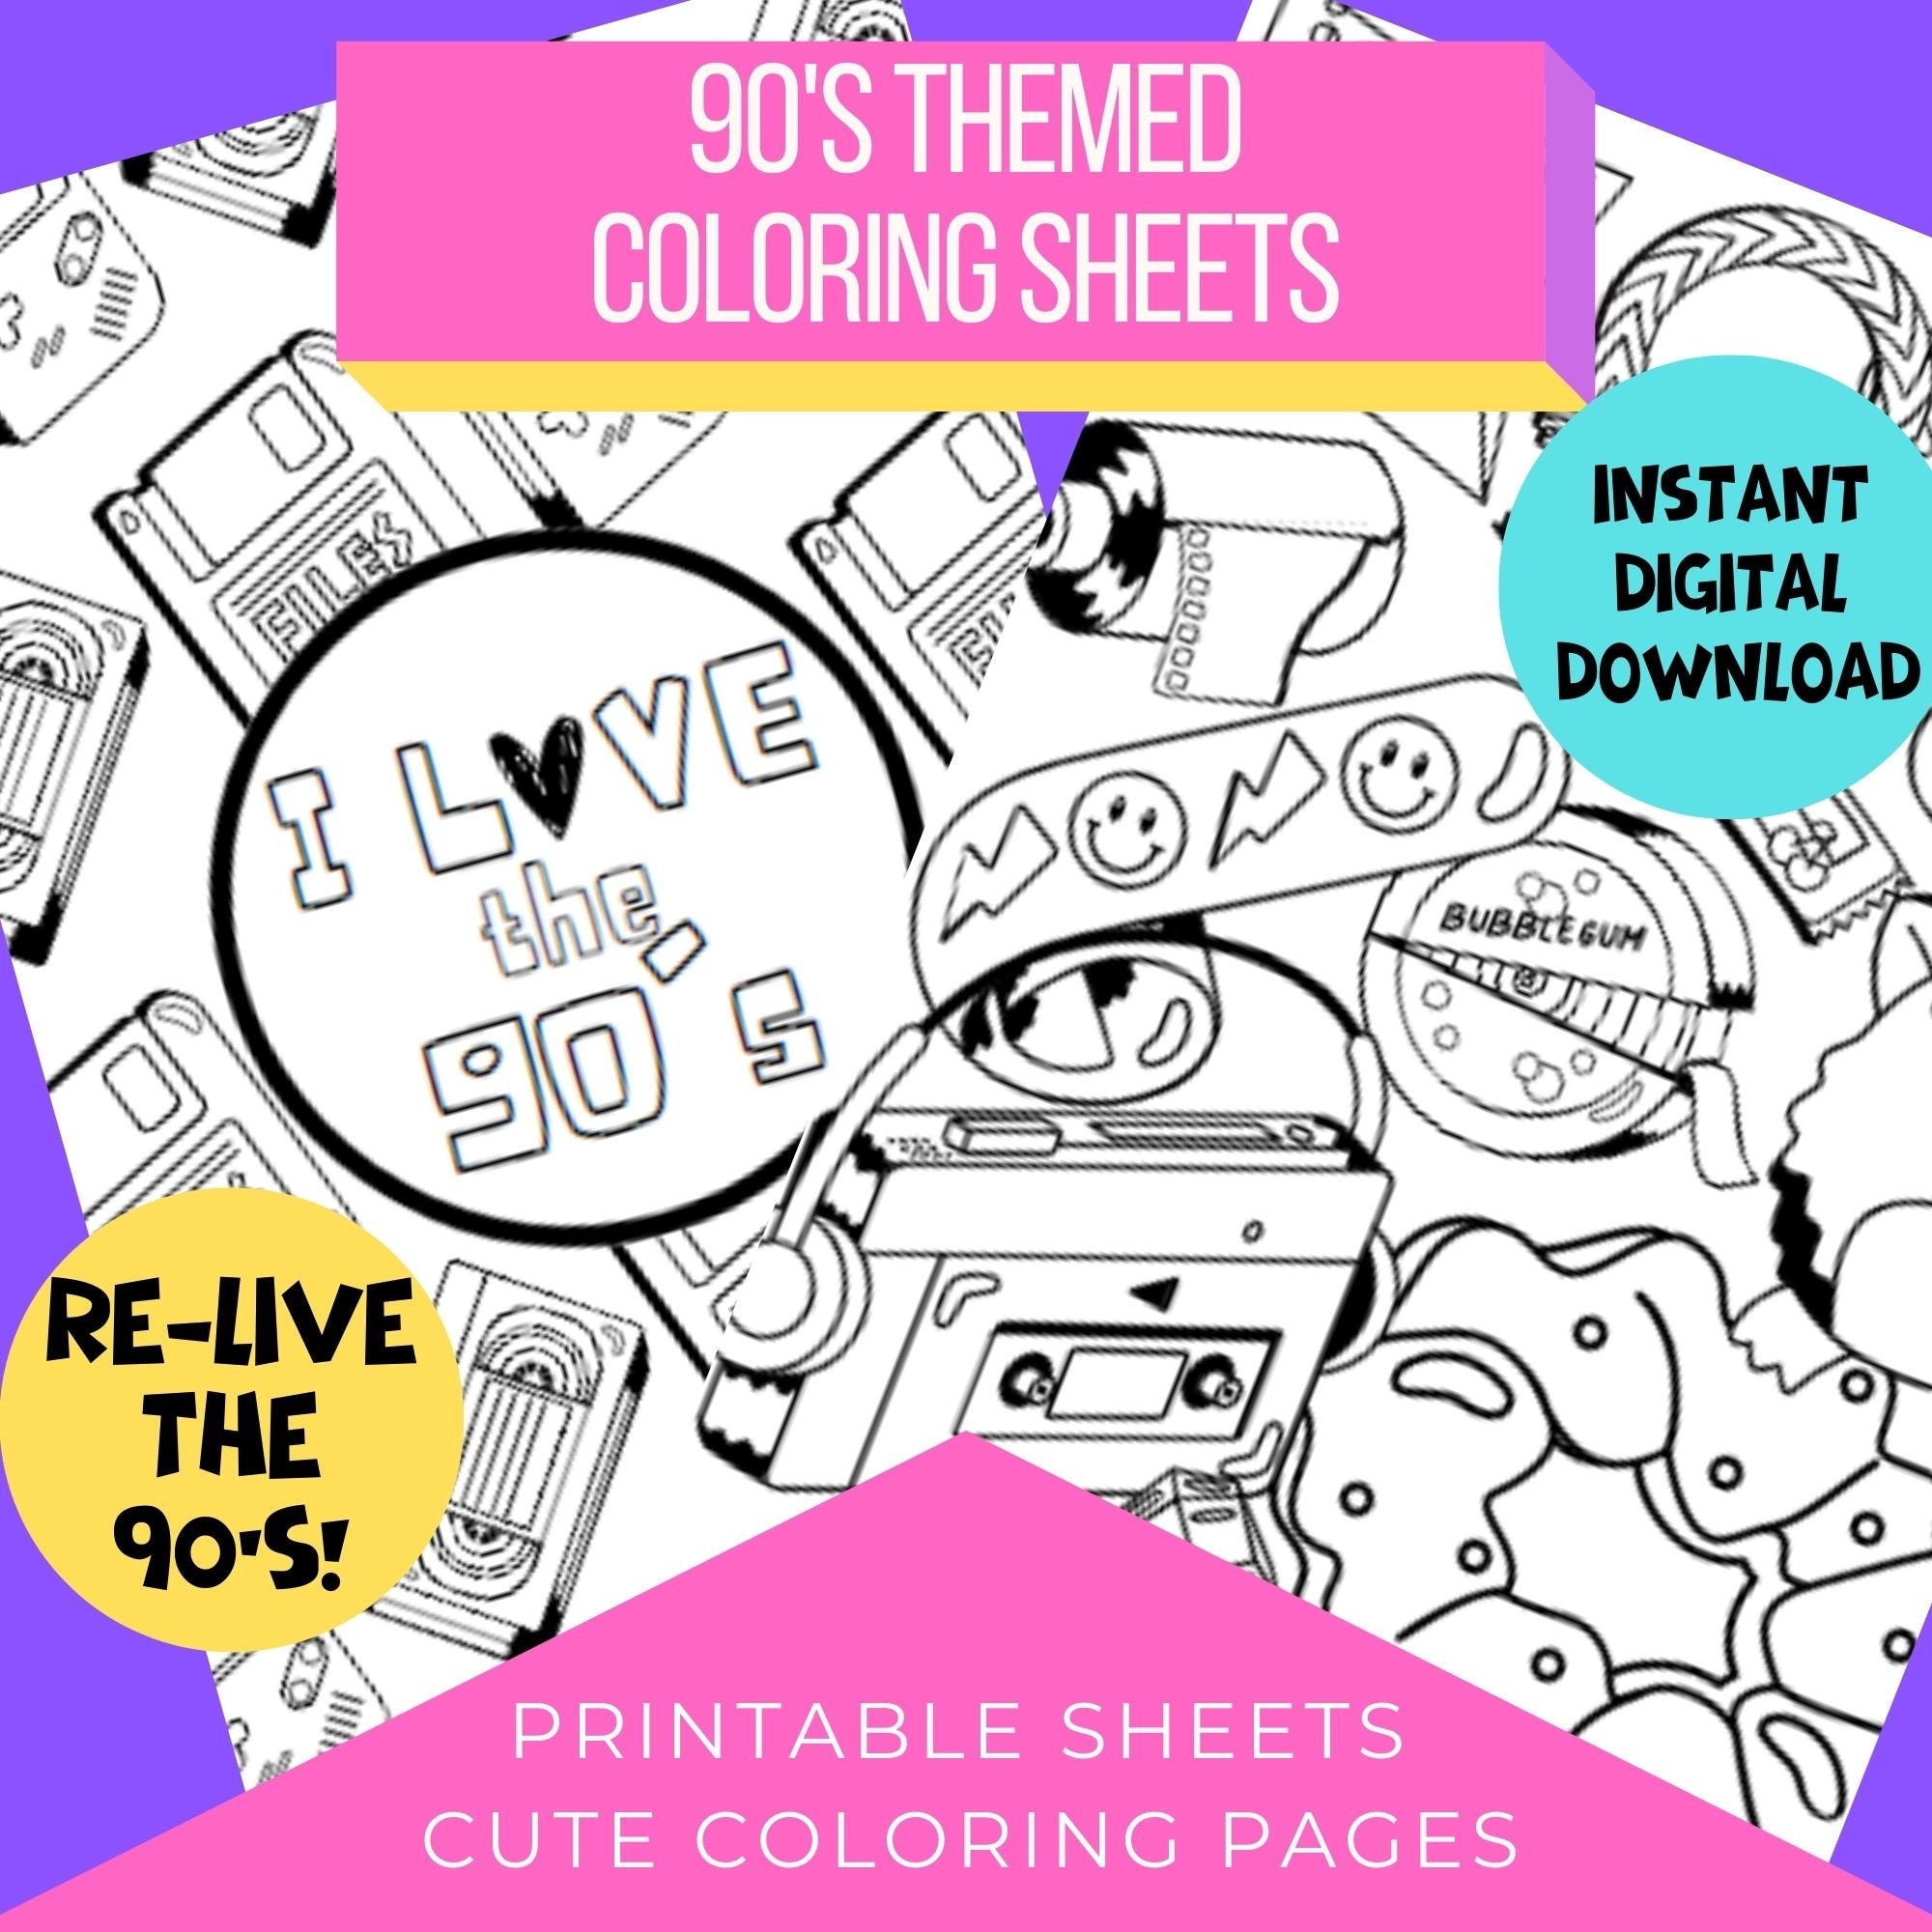 S themed printable coloring sheets enjoy s nostalgia colouring pages for adults fun s craft activity instant download pdf